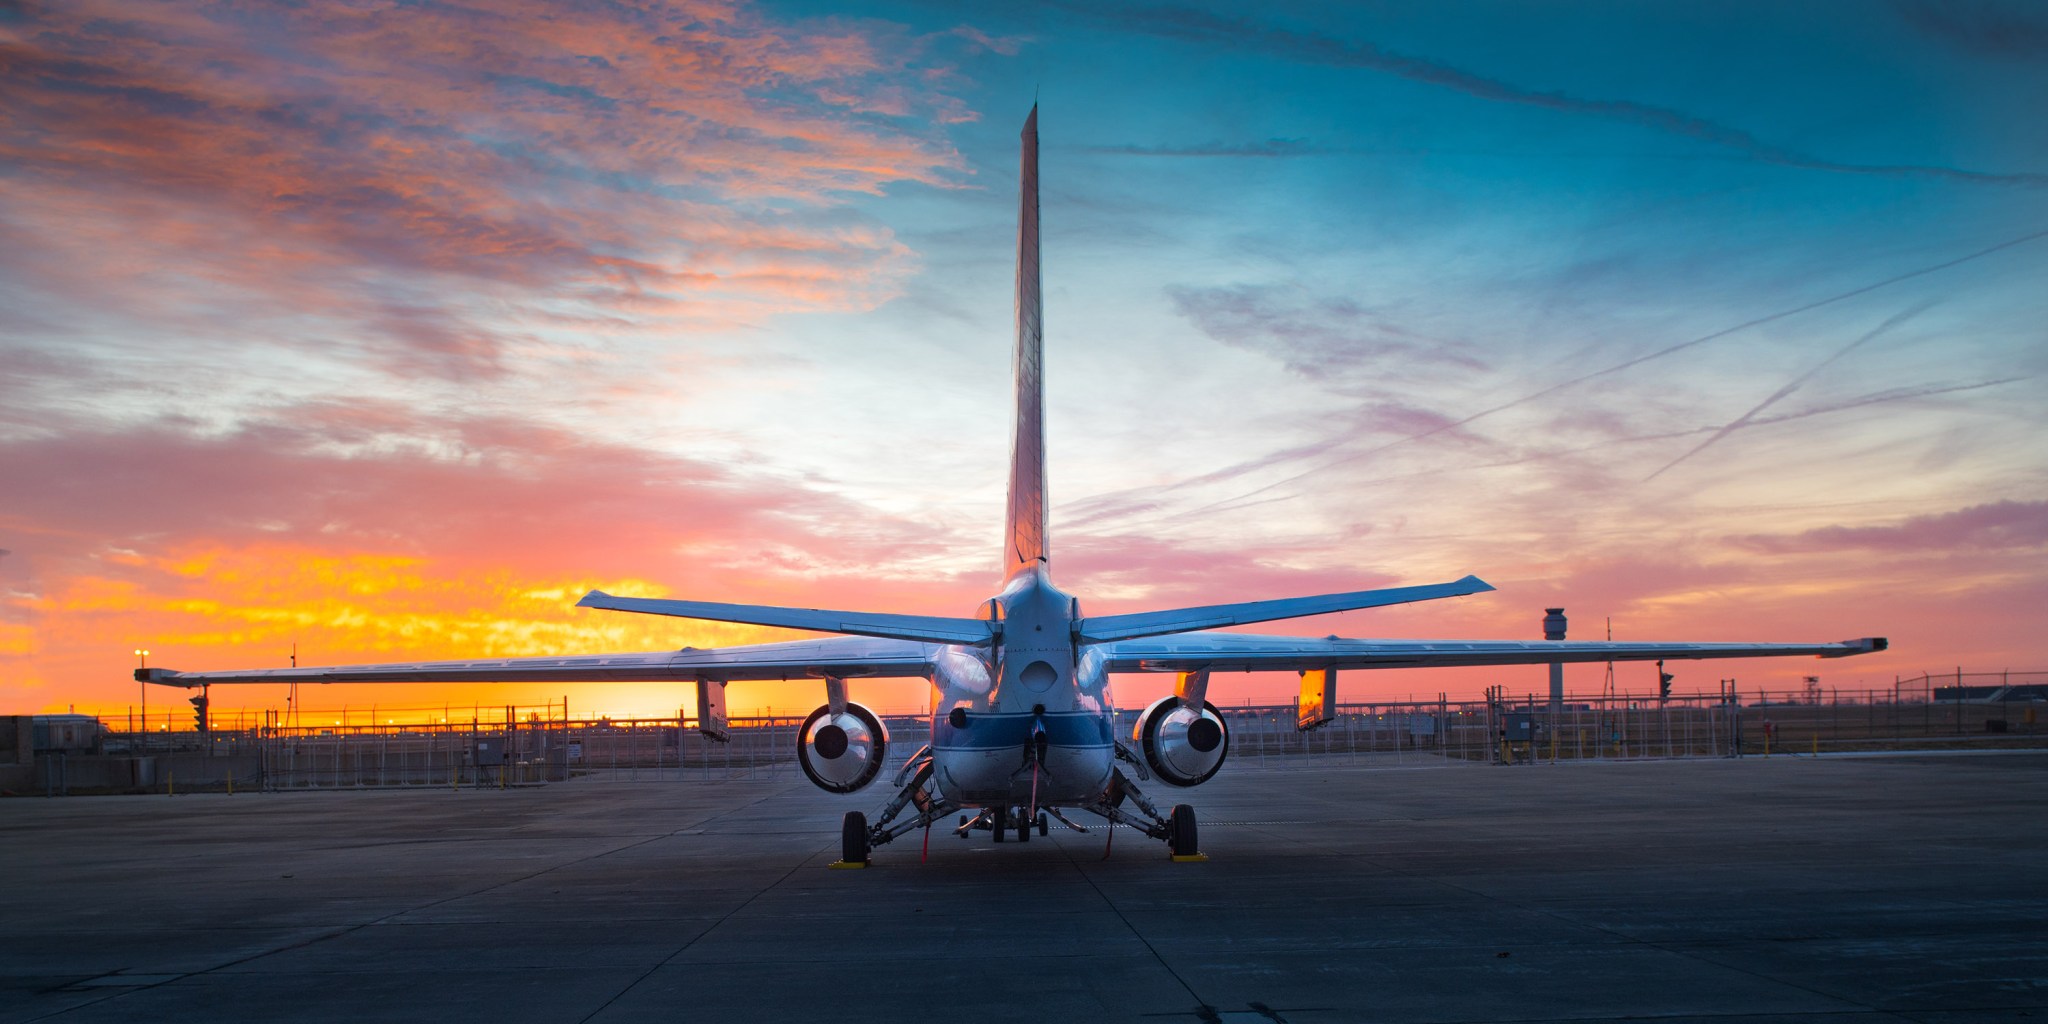 A research aircraft is seen from behind facing a beautiful sunset at Cleveland Hopkins Airport.